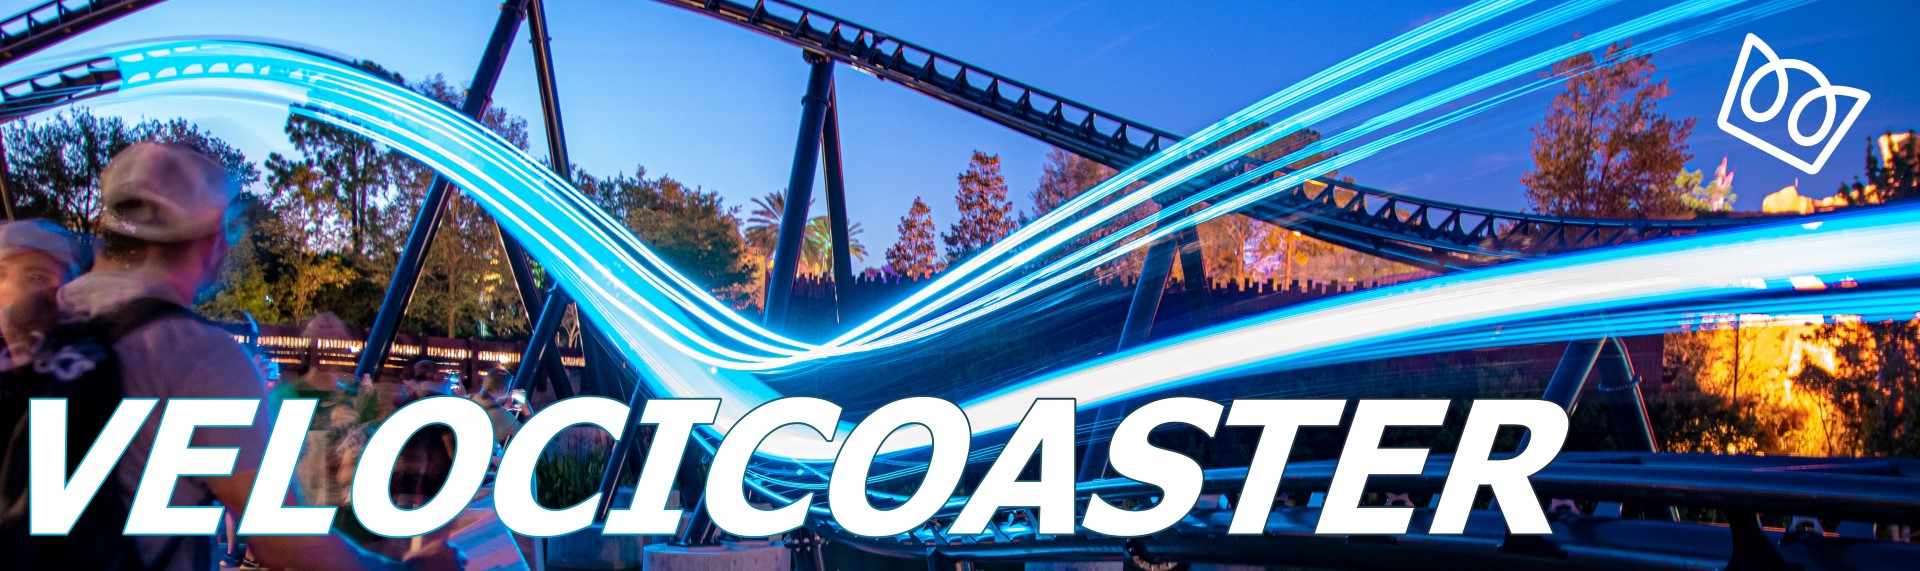 Universal shares new VelociCoaster details ahead of opening